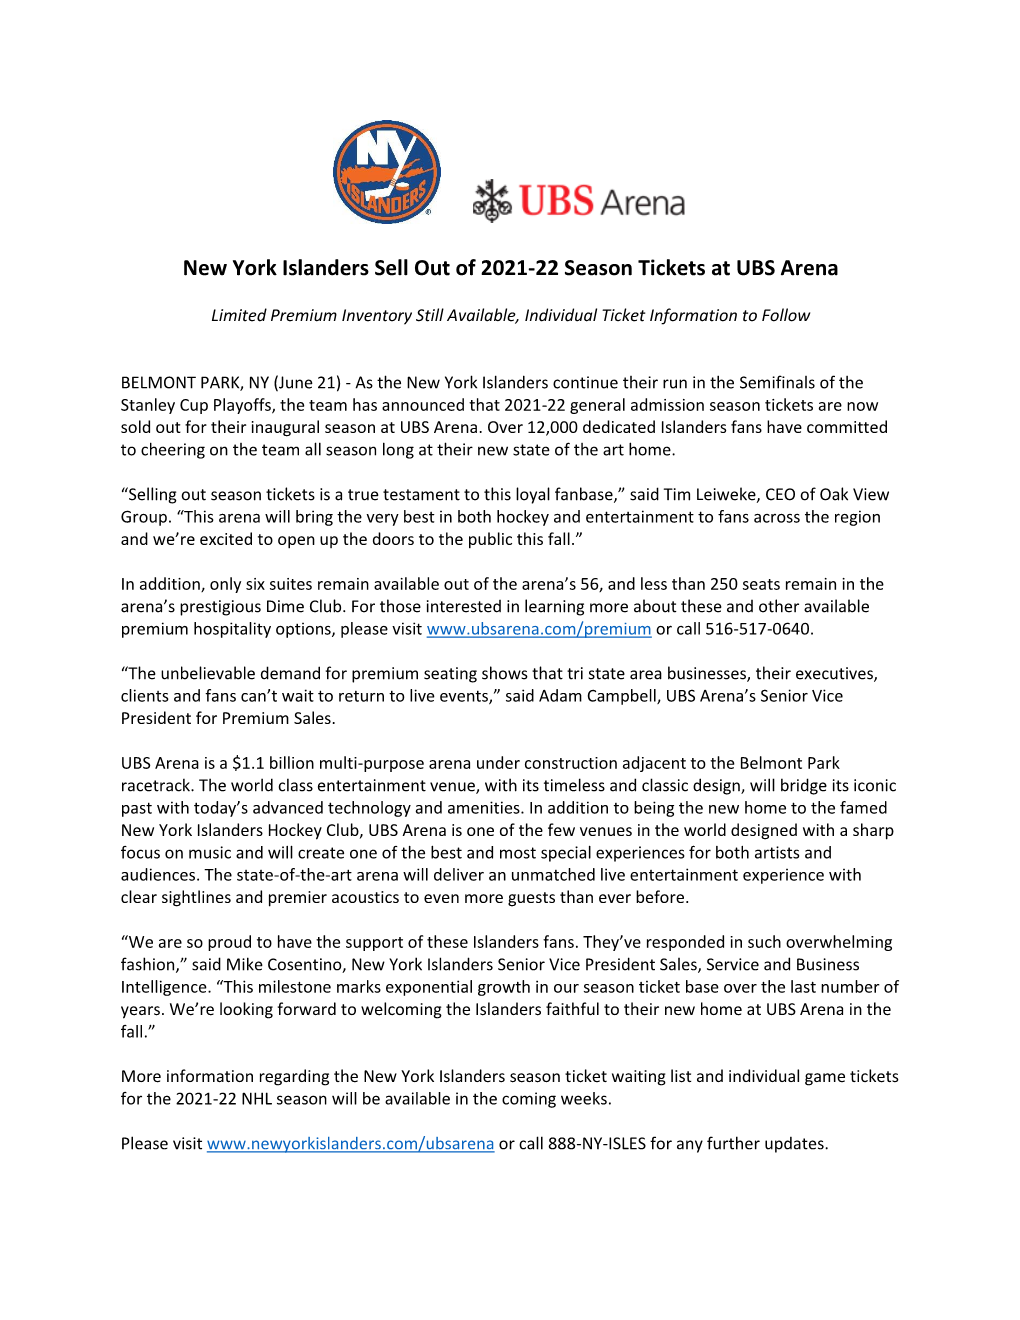 New York Islanders Sell out of 2021-22 Season Tickets at UBS Arena